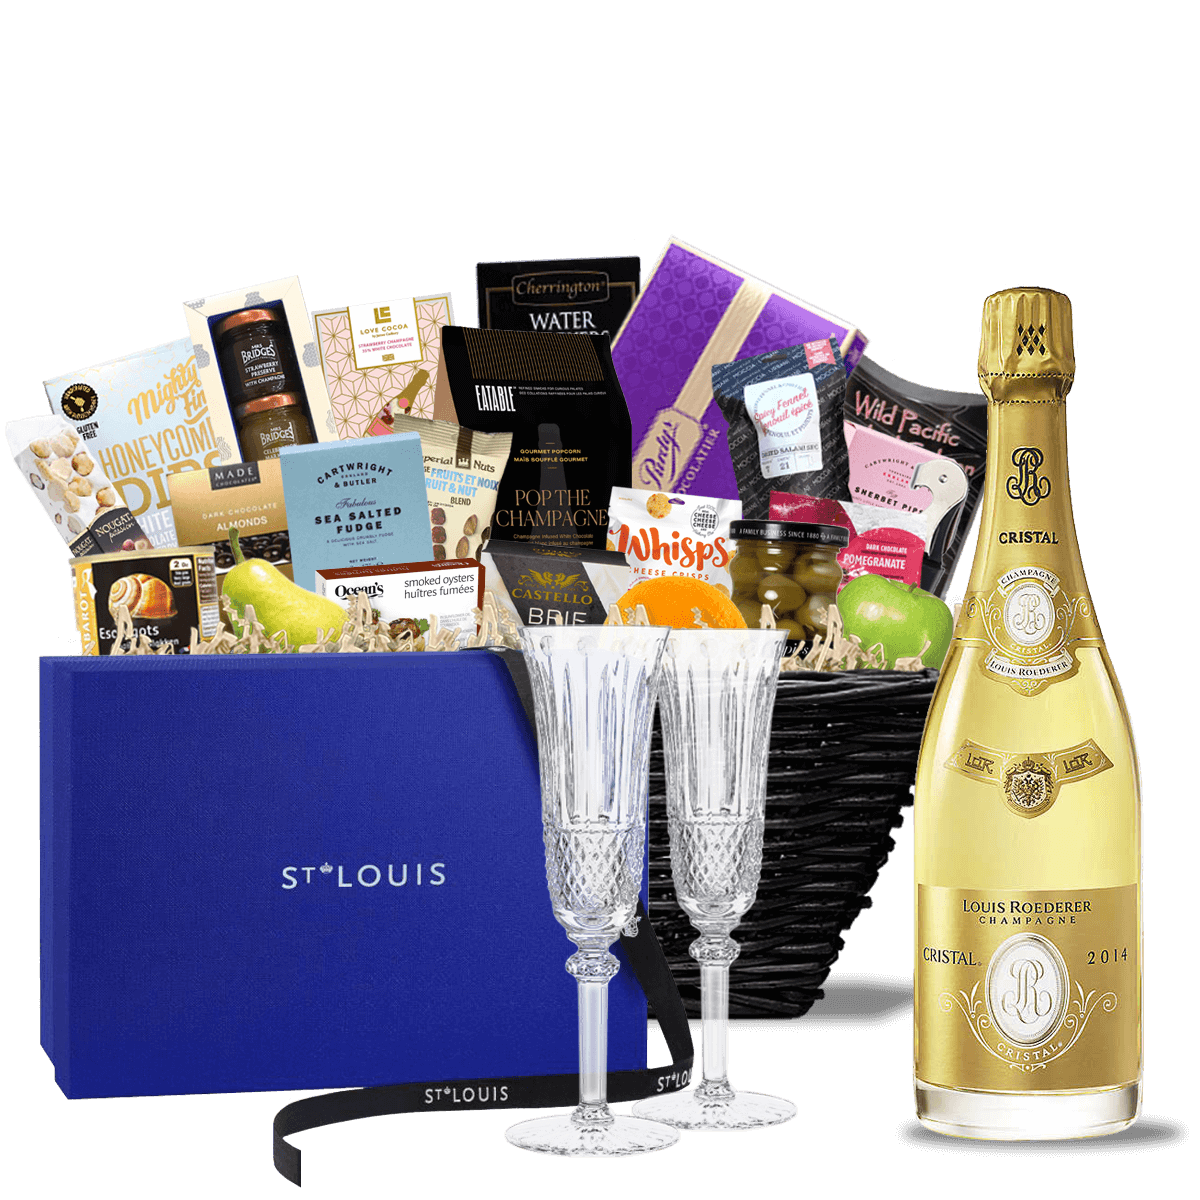 TAG Liquor Stores BC - Cristal Champagne 2014 Ultra Luxe Gift Basket